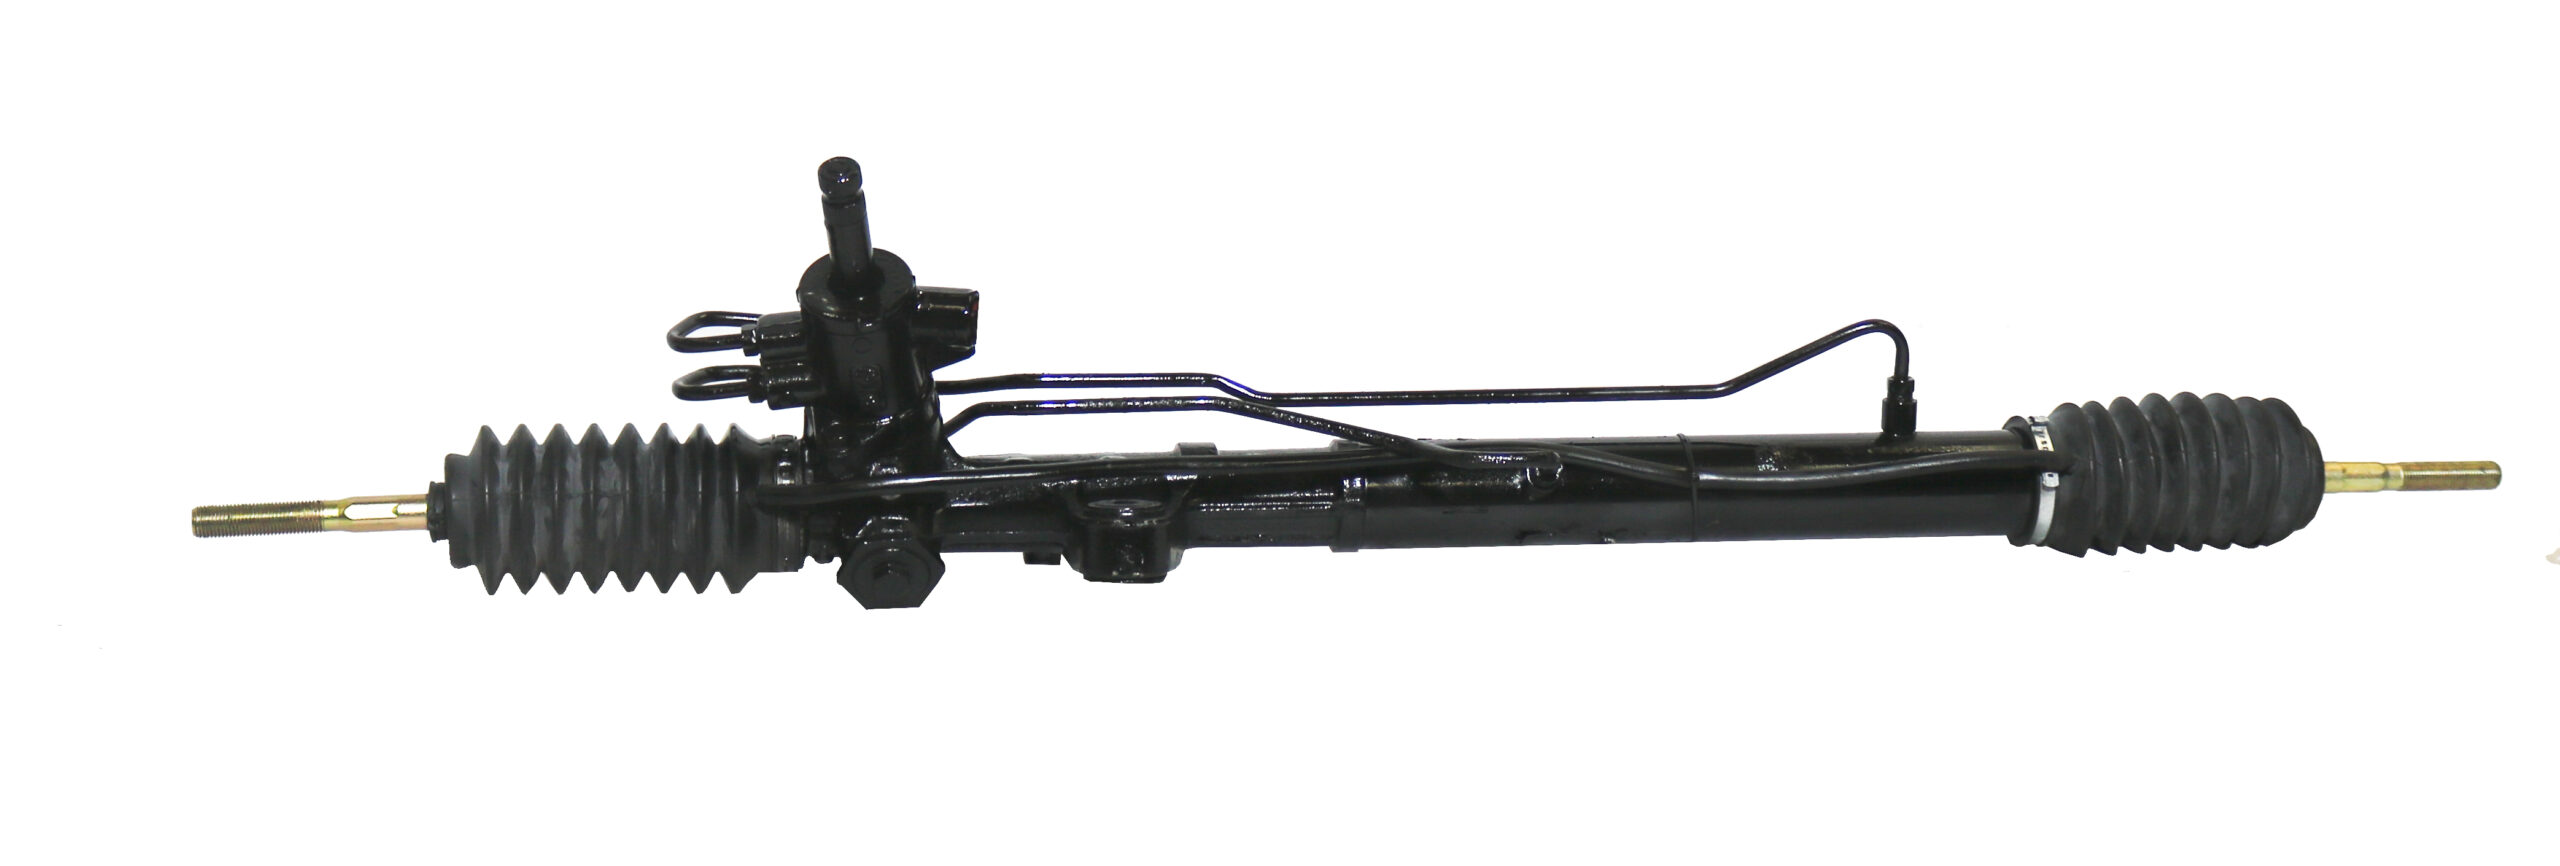 Acura CL hydrolic power steering rack and pinion gear.